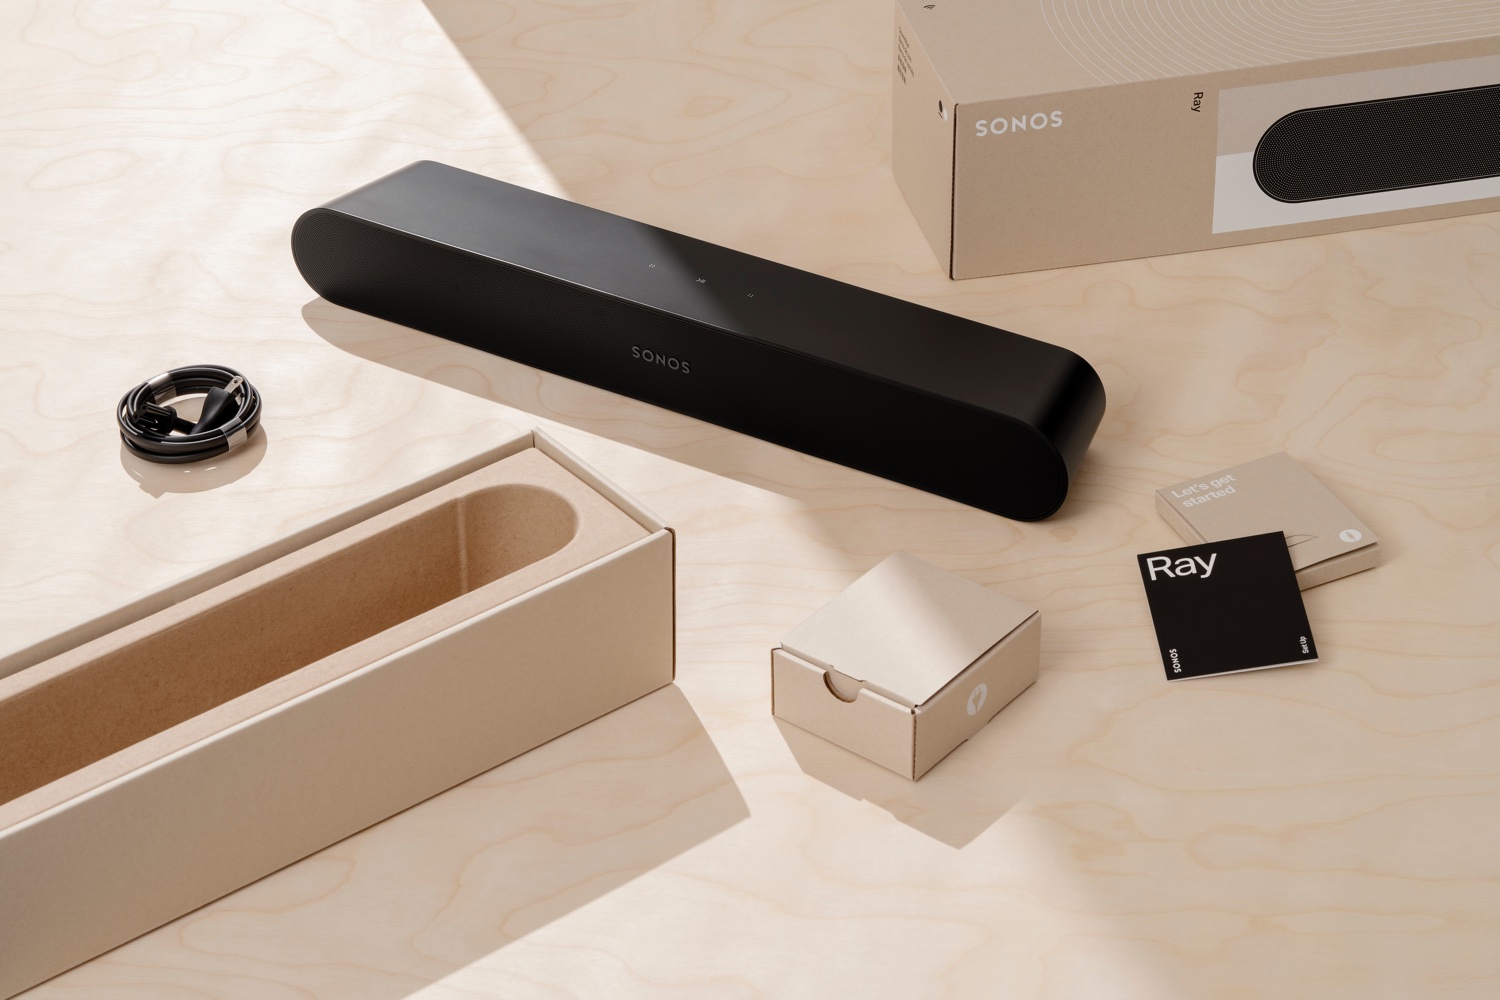 Sonos Home Theater’s Premium Packaging